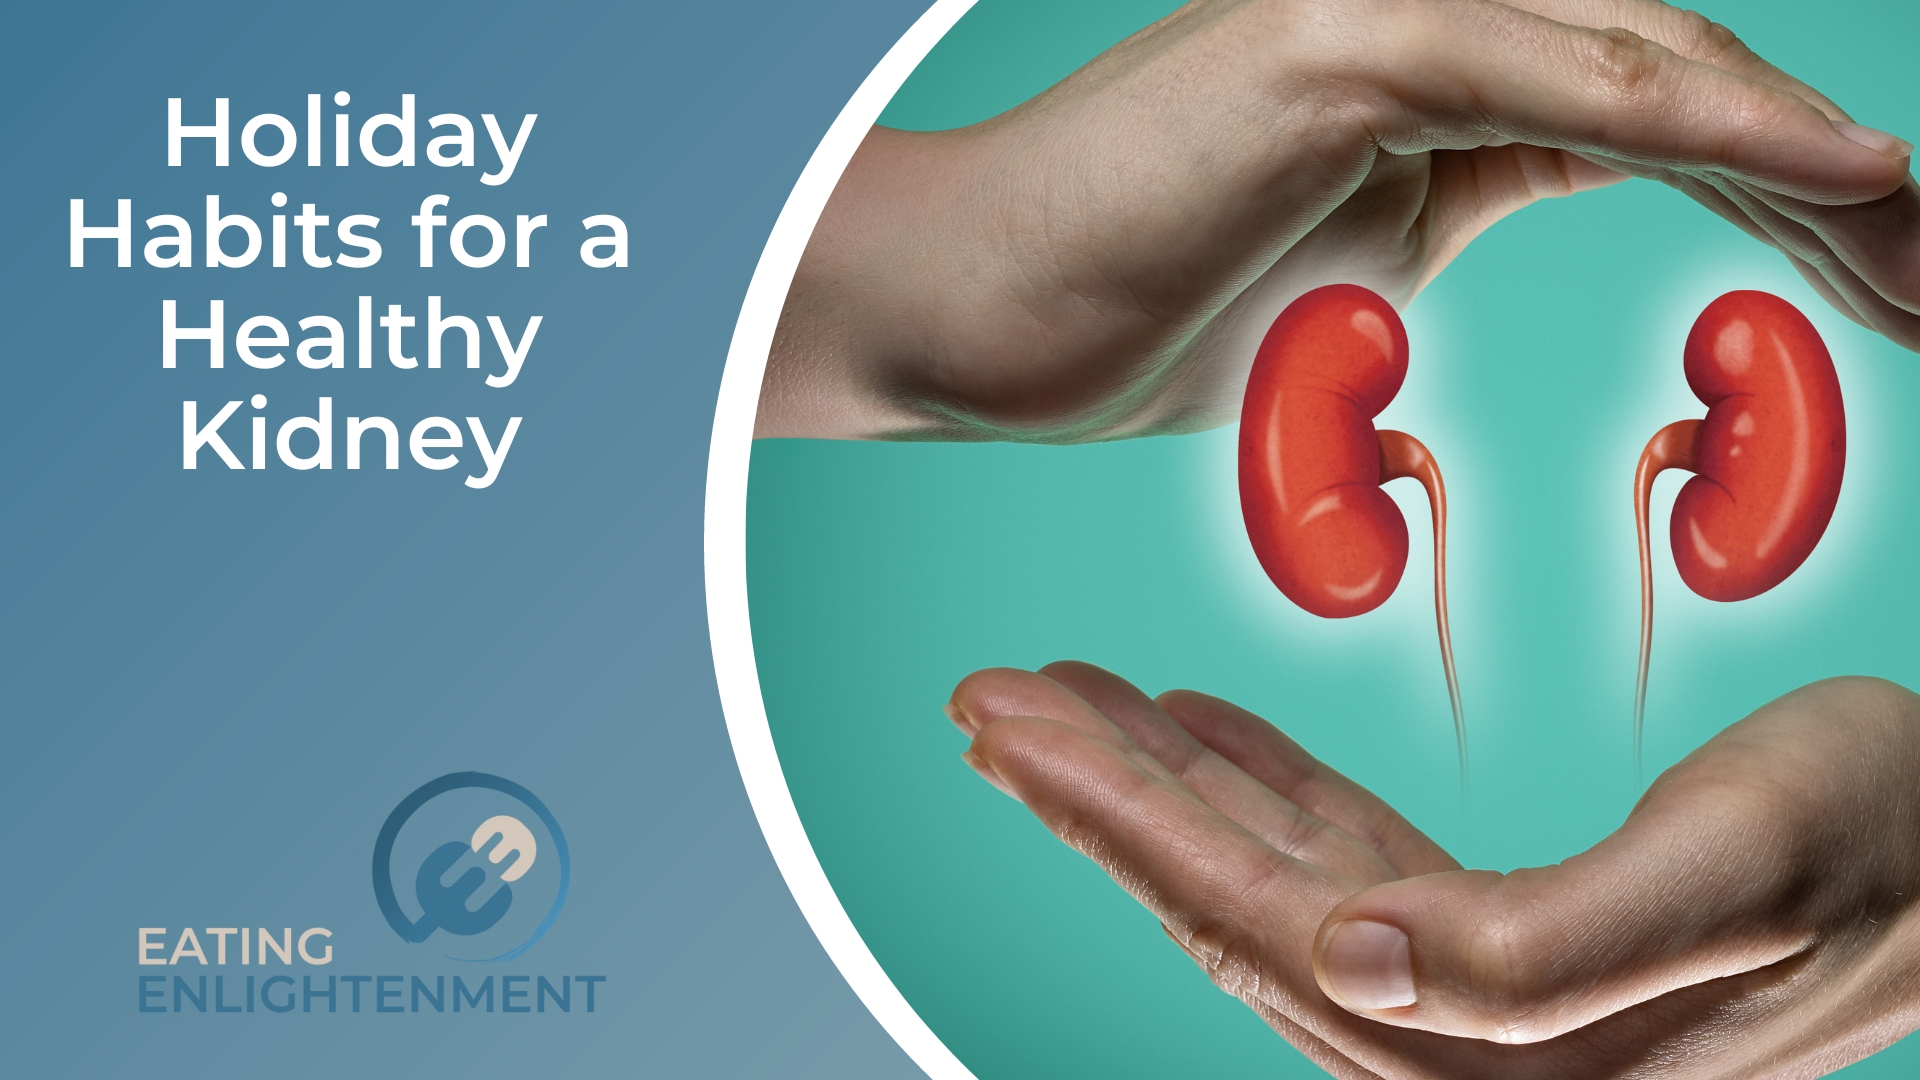 Holiday Habits for a Healthy Kidney